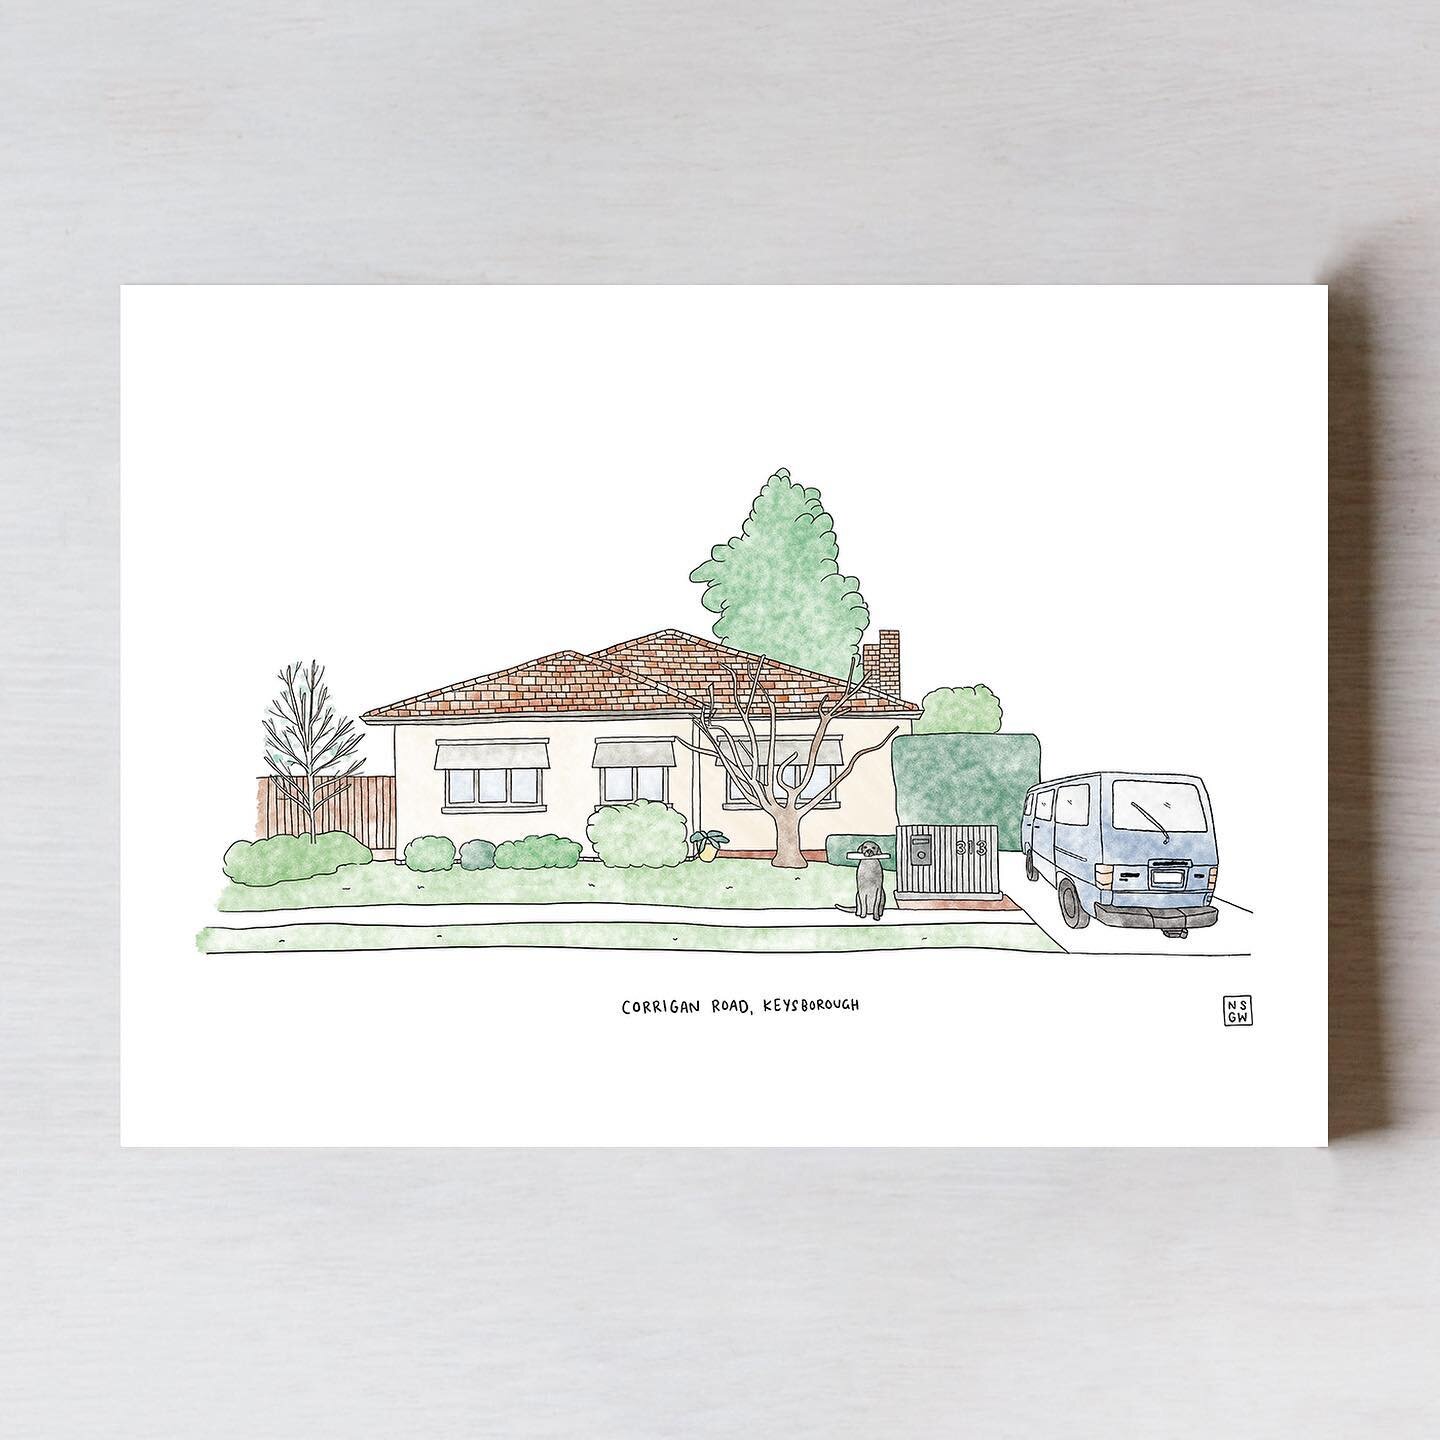 It&rsquo;s a little under one month til Mother&rsquo;s Day 🌸 I&rsquo;ve opened up a limited bunch of custom house drawings! 🖼️ They make the perfect gift &ndash; a timeless way to hold memories forever. More info at link in bio 💕